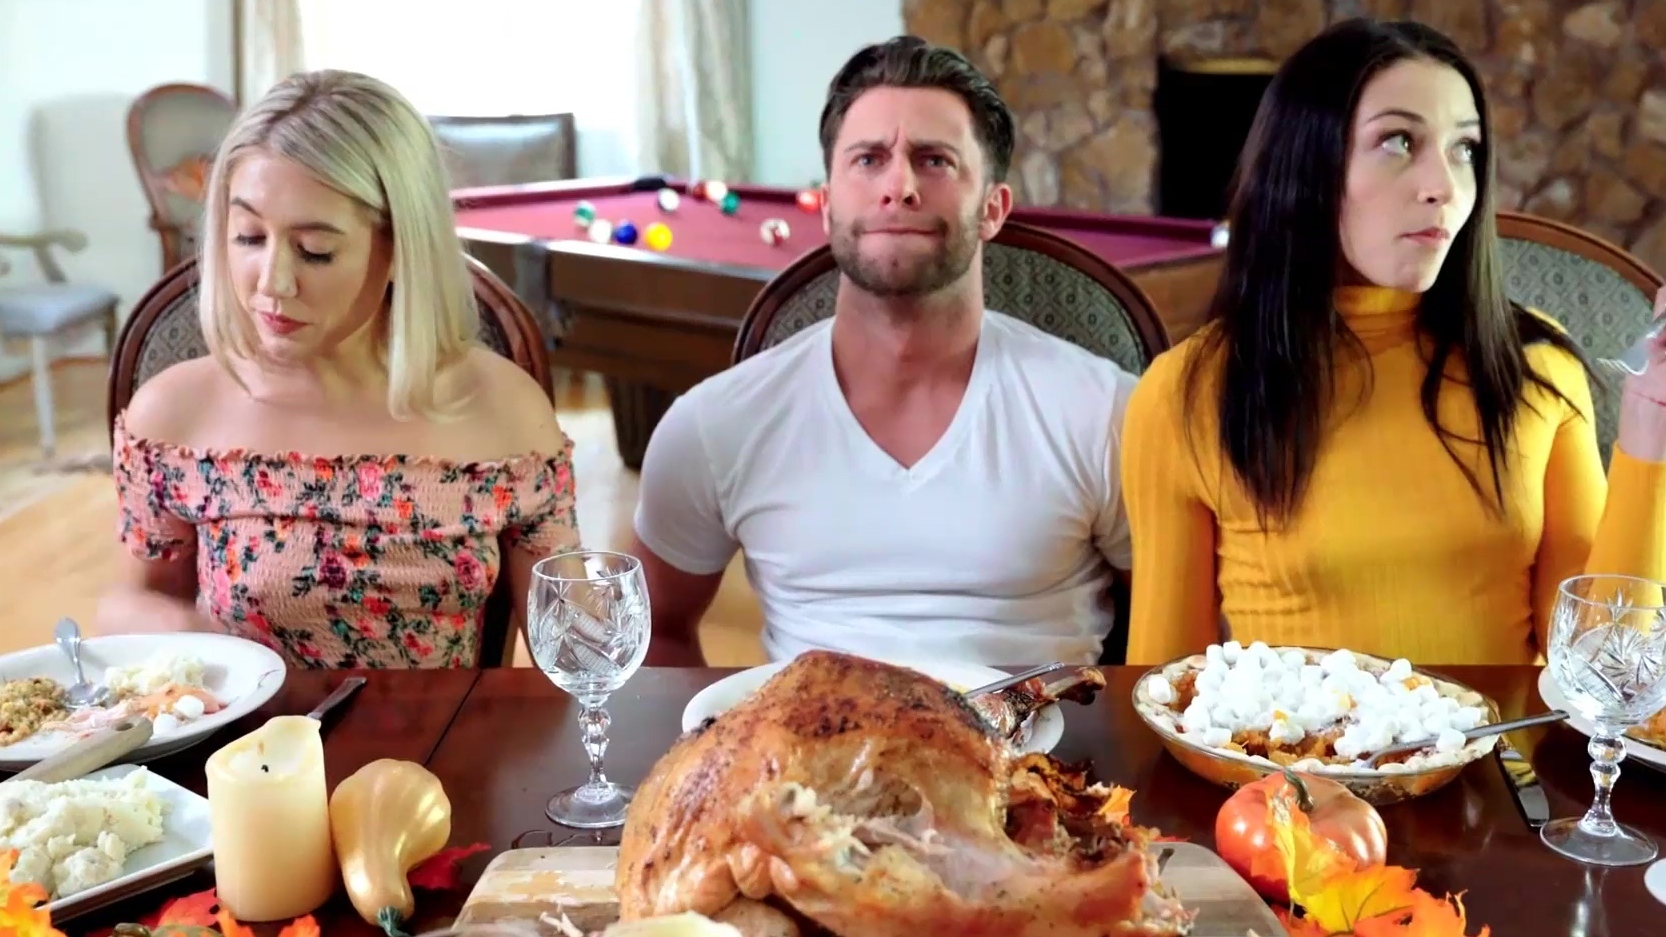 Wild handjob from brunette and blonde stepsisters during Thanksgiving dinner pic